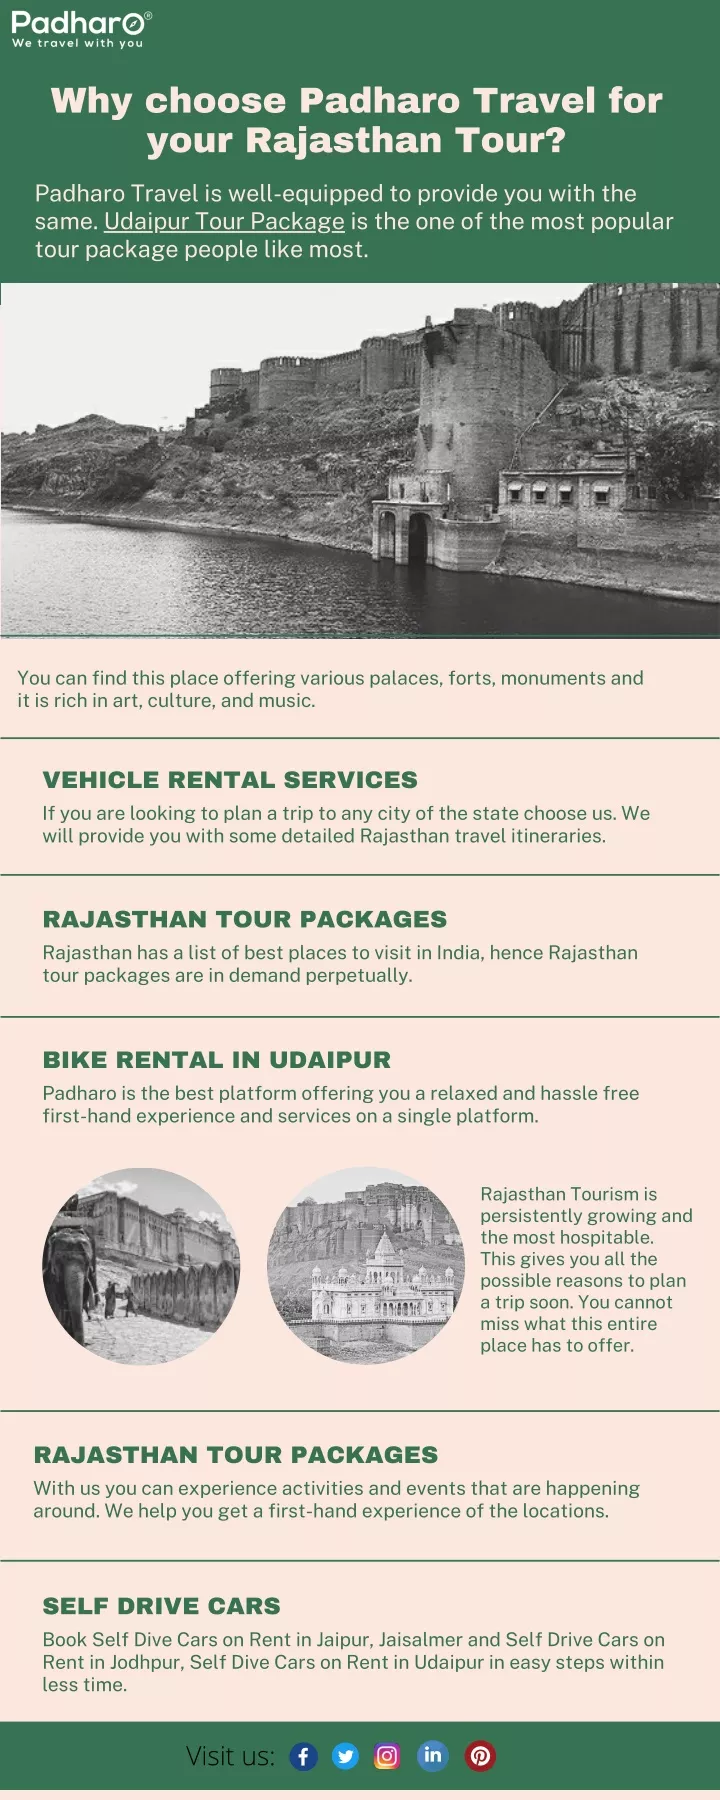 why choose padharo travel for your rajasthan tour